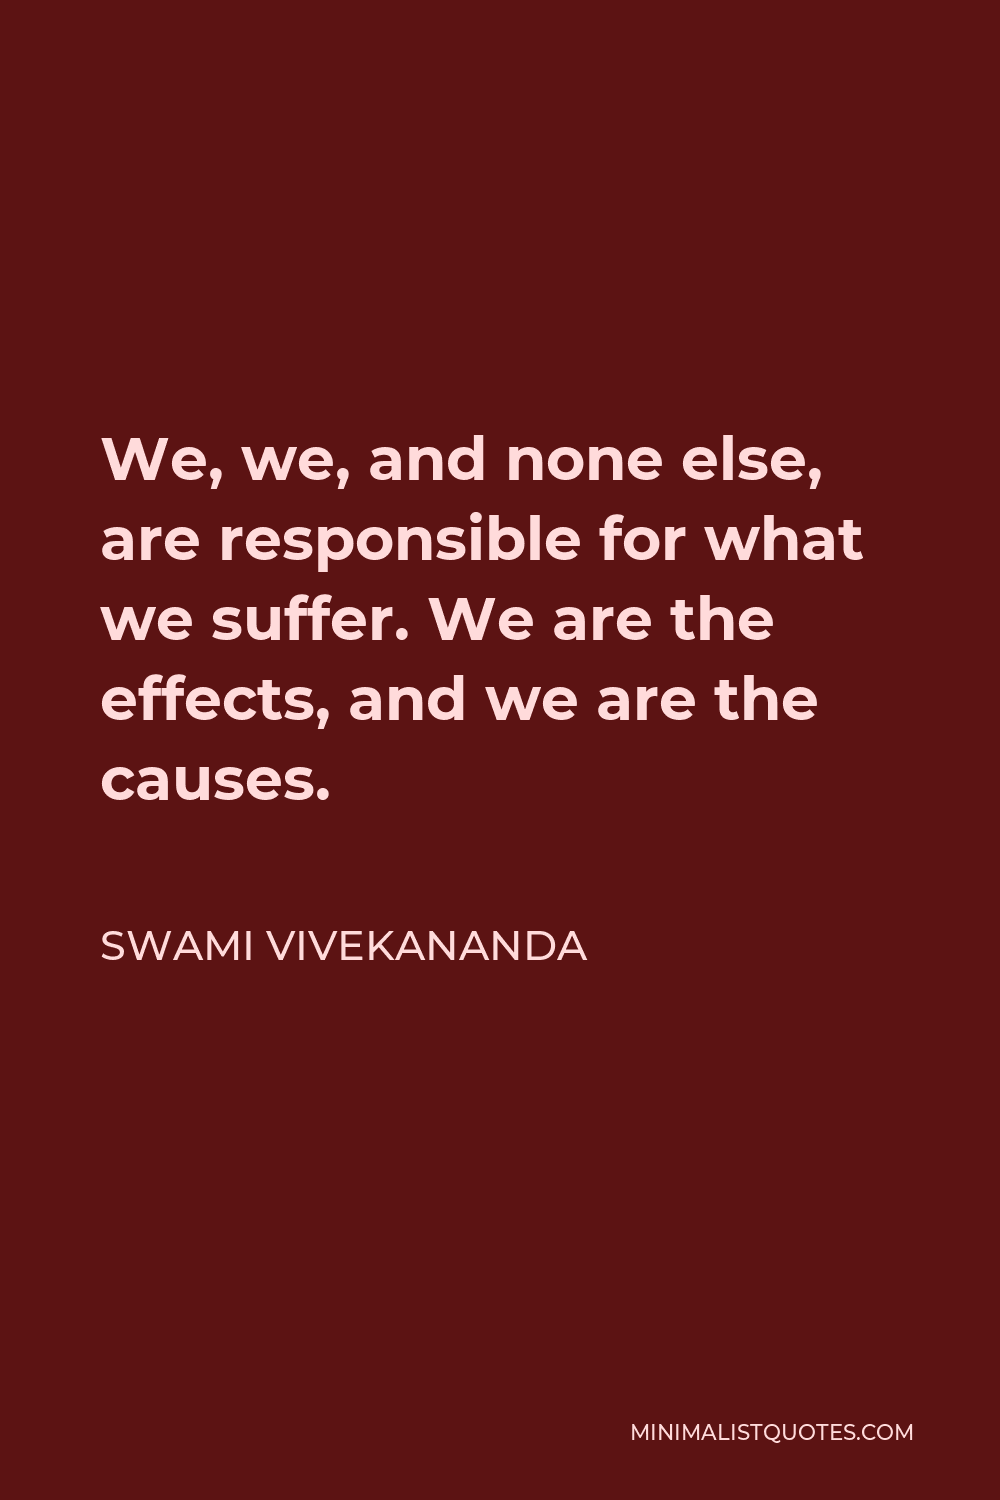 Swami Vivekananda Quote - We, we, and none else, are responsible for what we suffer. We are the effects, and we are the causes.